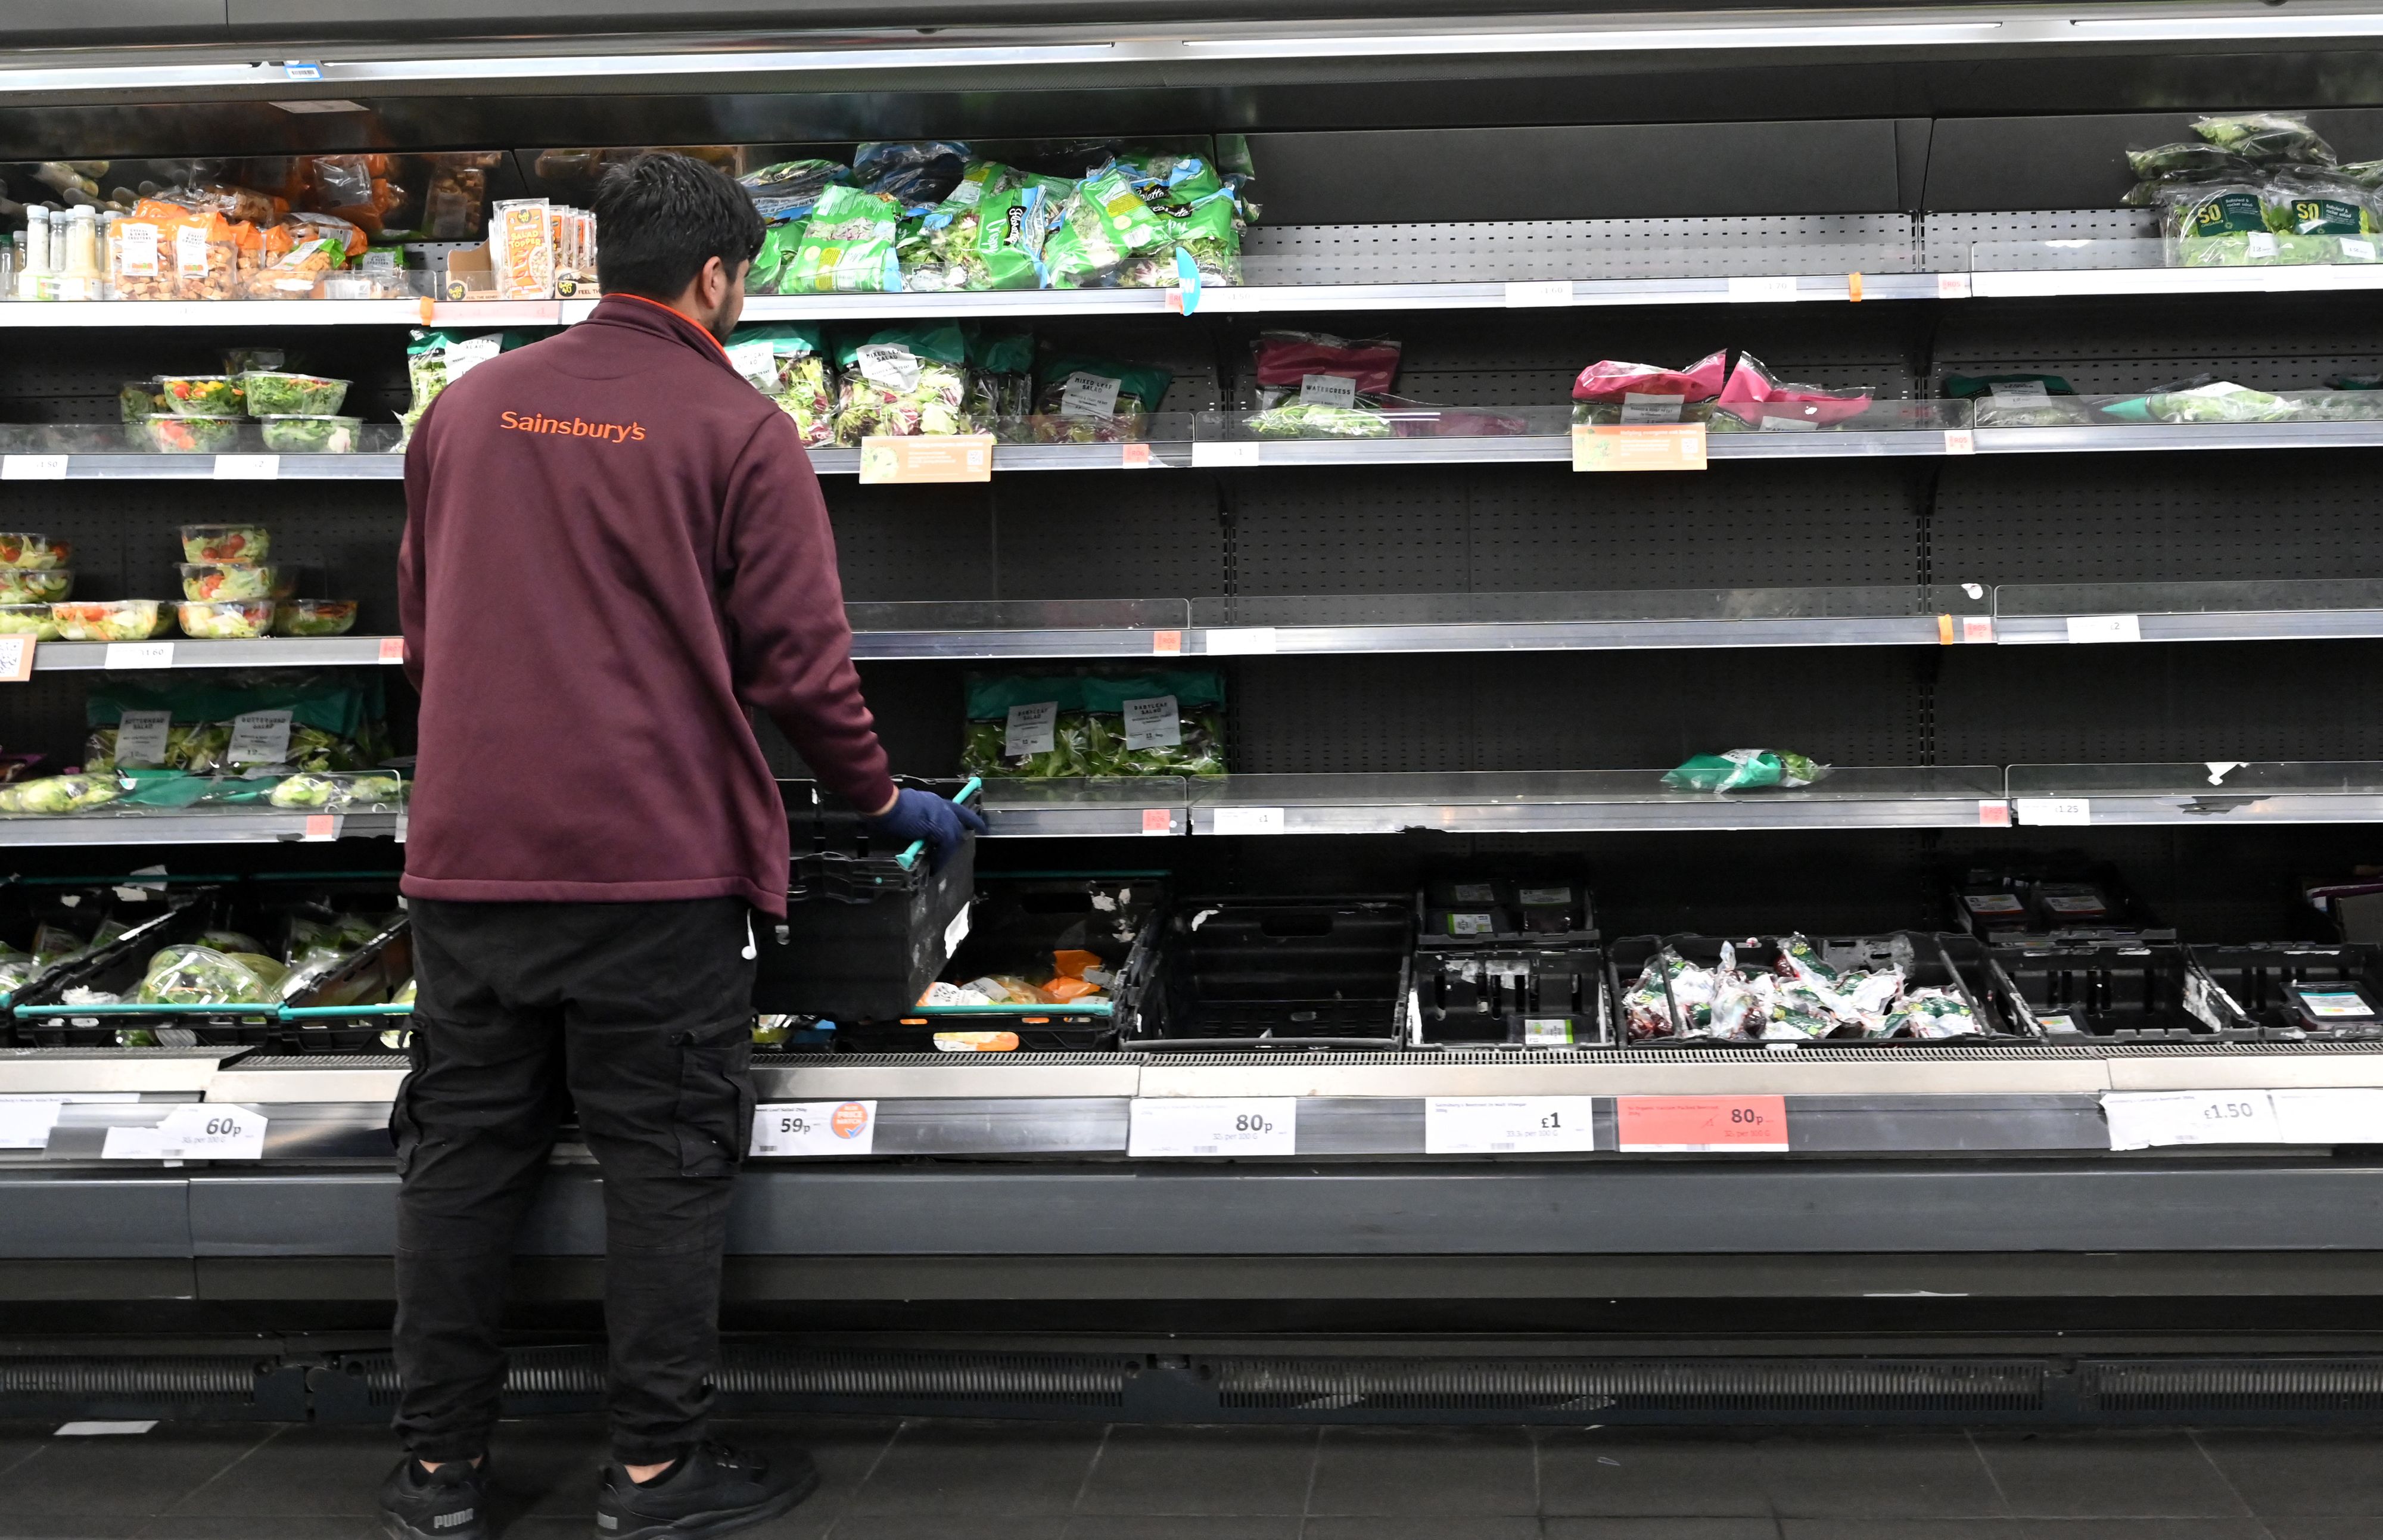 Empty fresh produce shelves at Sainsbury’s are tended to by a staff member